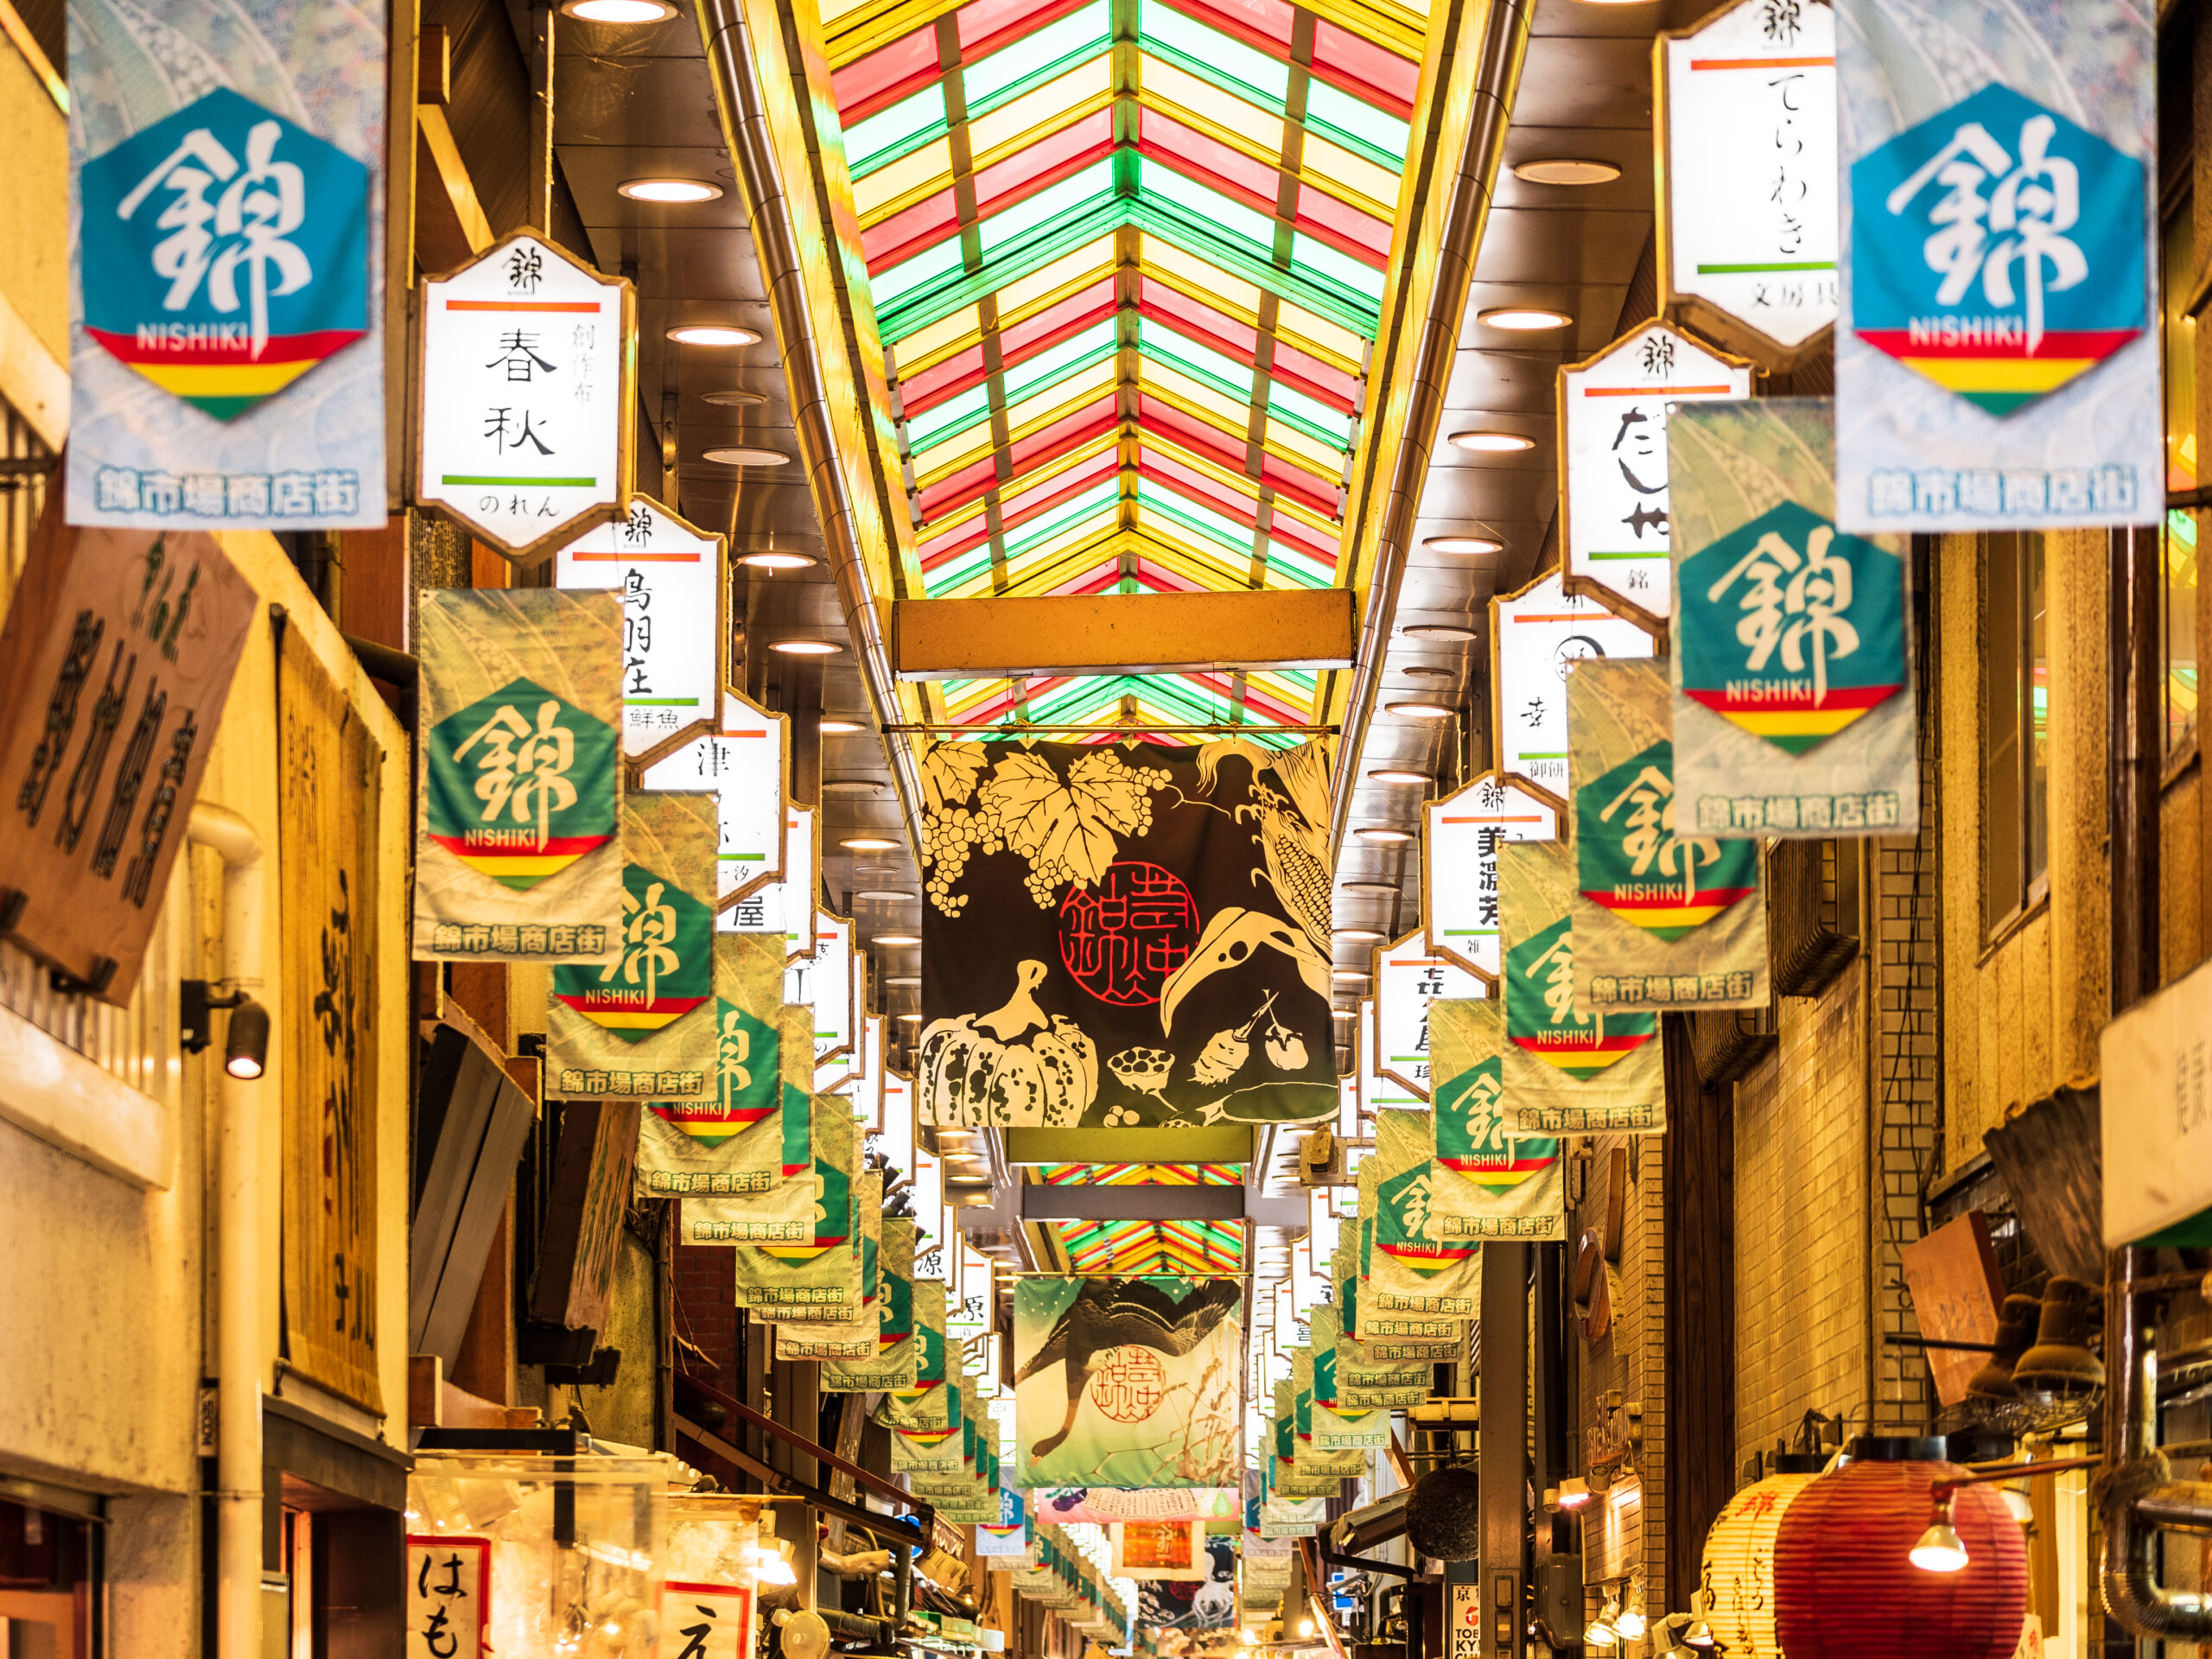 The arcade of the Nishiki market in Kyoto, Japan